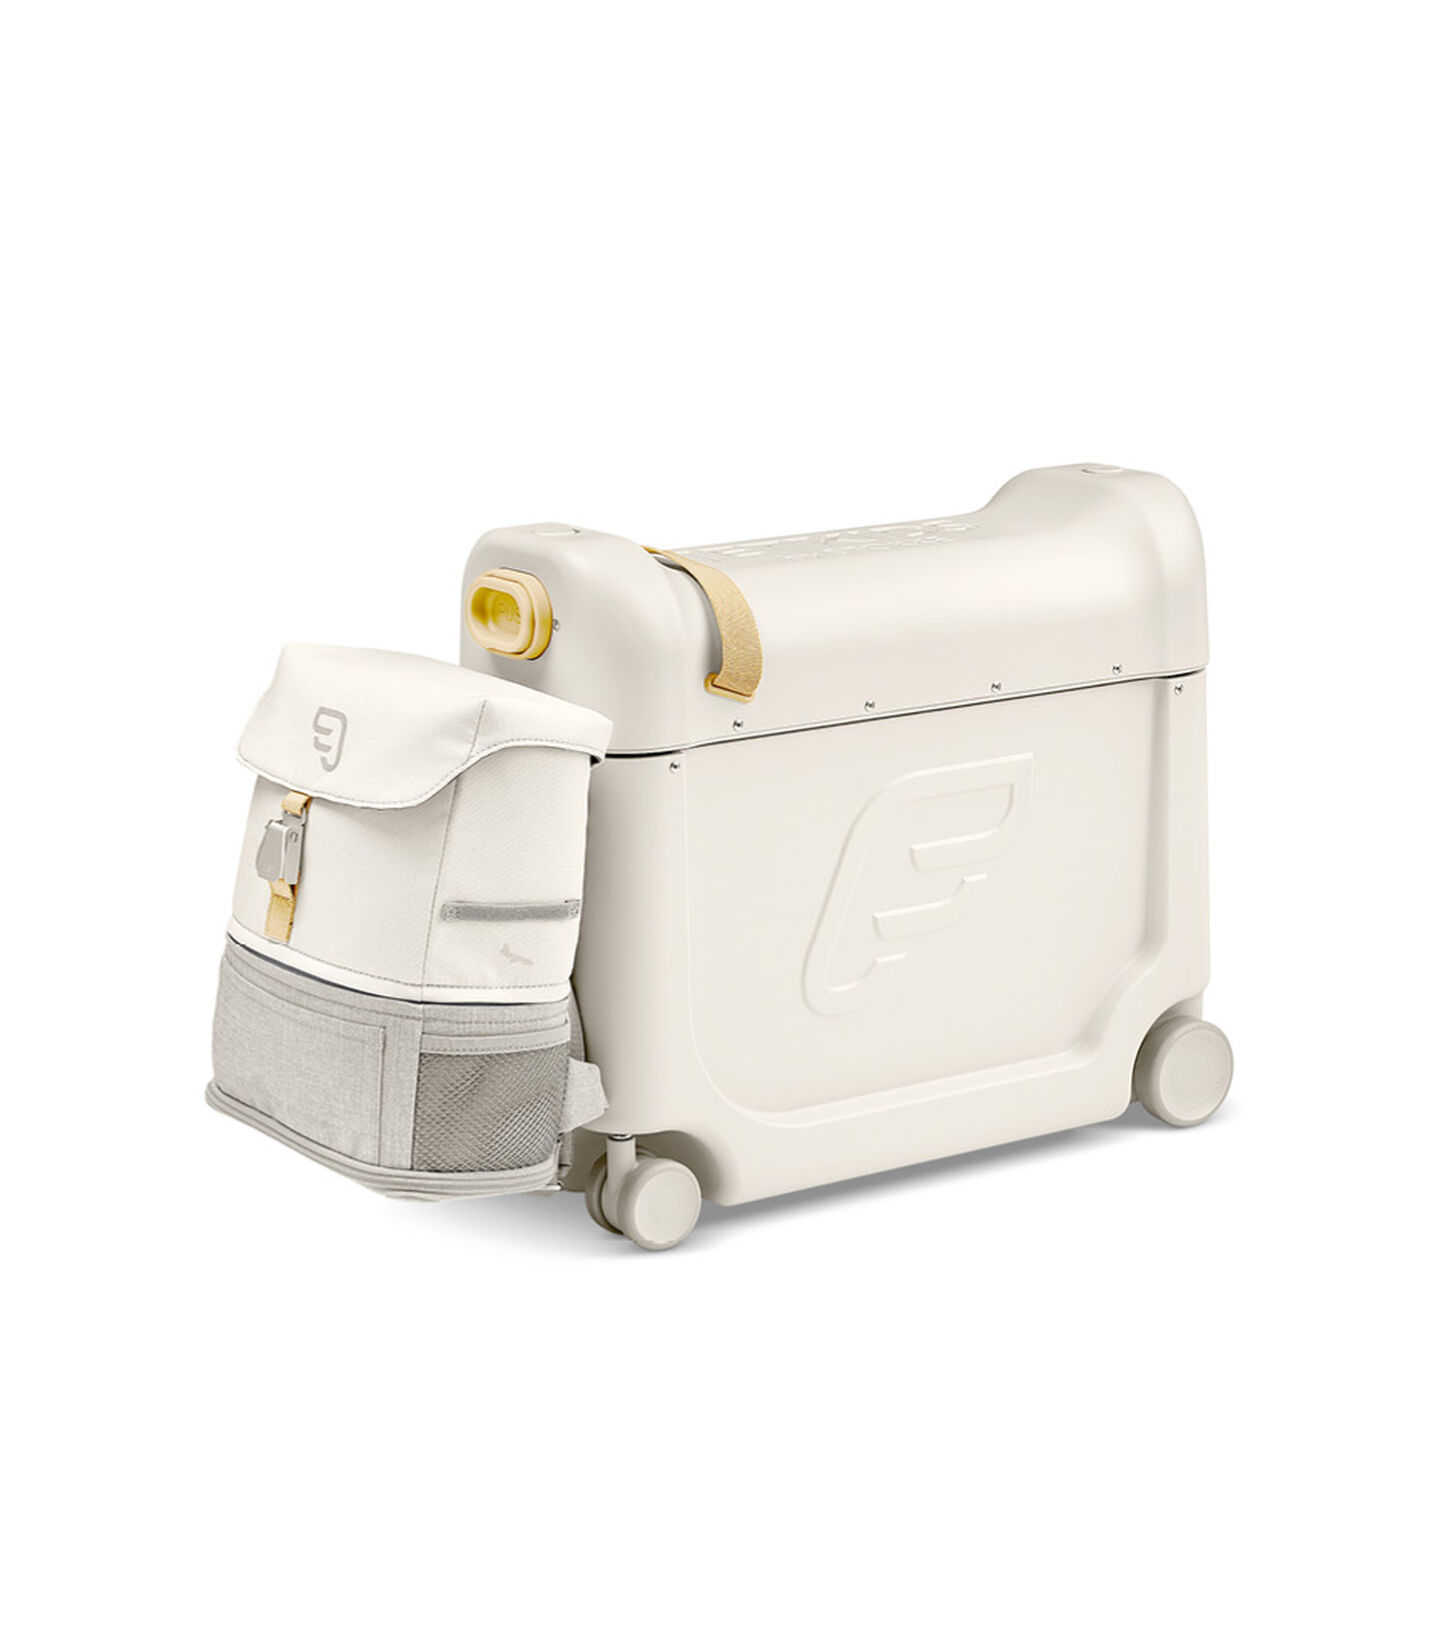 JetKids™ by Stokke® Crew BackPack on BedBox V3, Full Moon White. Bundle. view 3